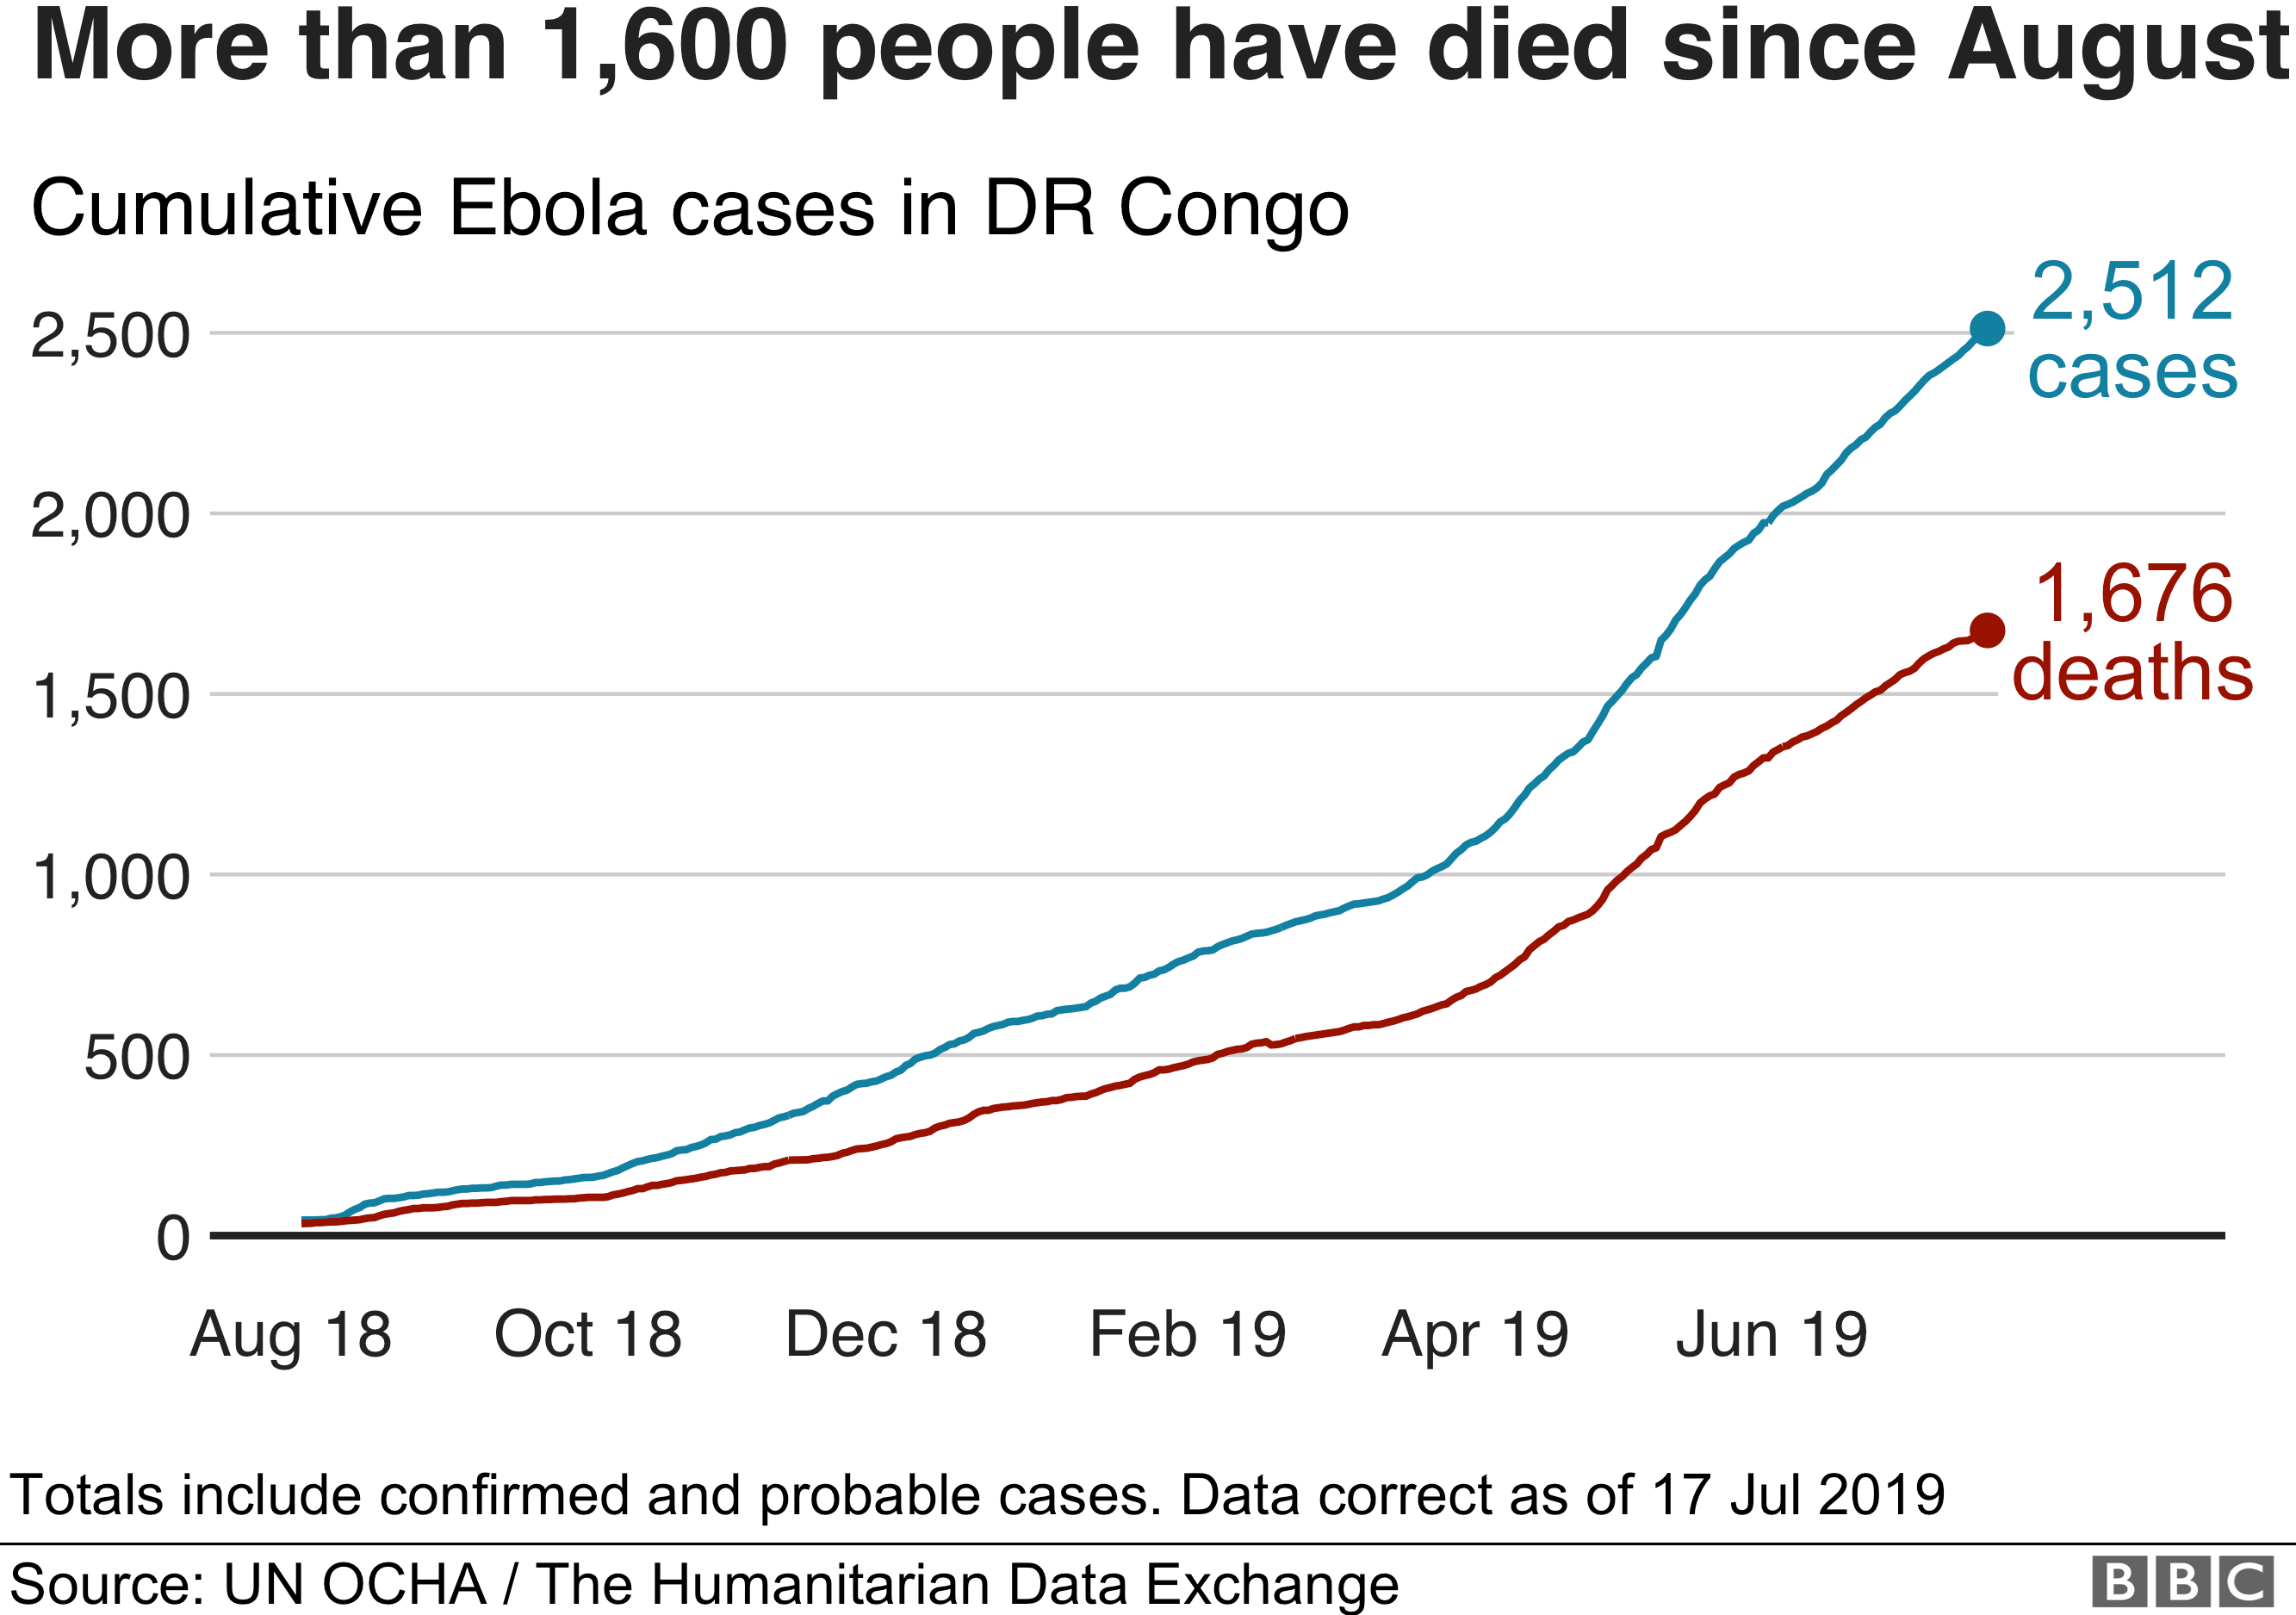 Chart showing the rising number of Ebola cases in DR Congo